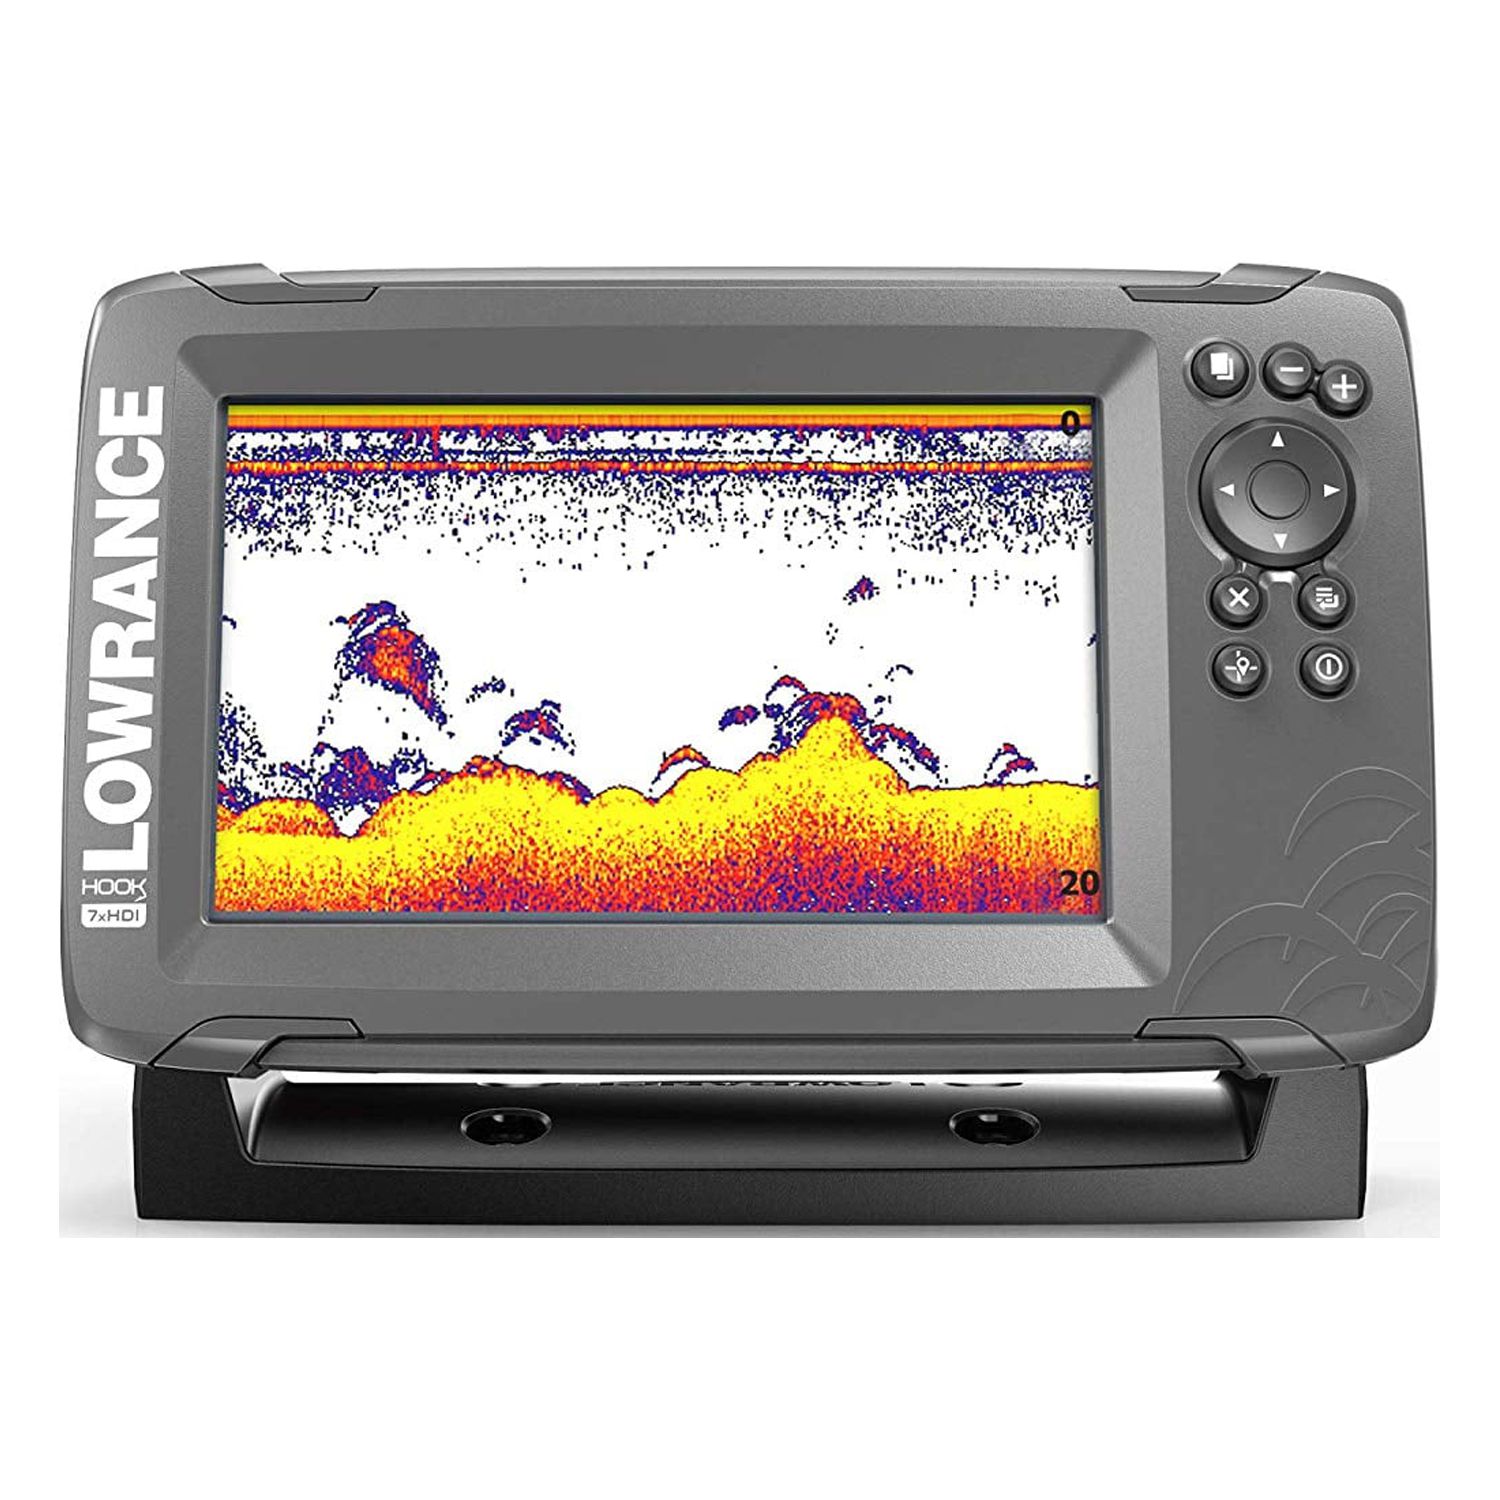 Lowrance HOOK2 7X 7 In. Fishfinder with Split Shot Transducer and GPS Plotter - image 1 of 4